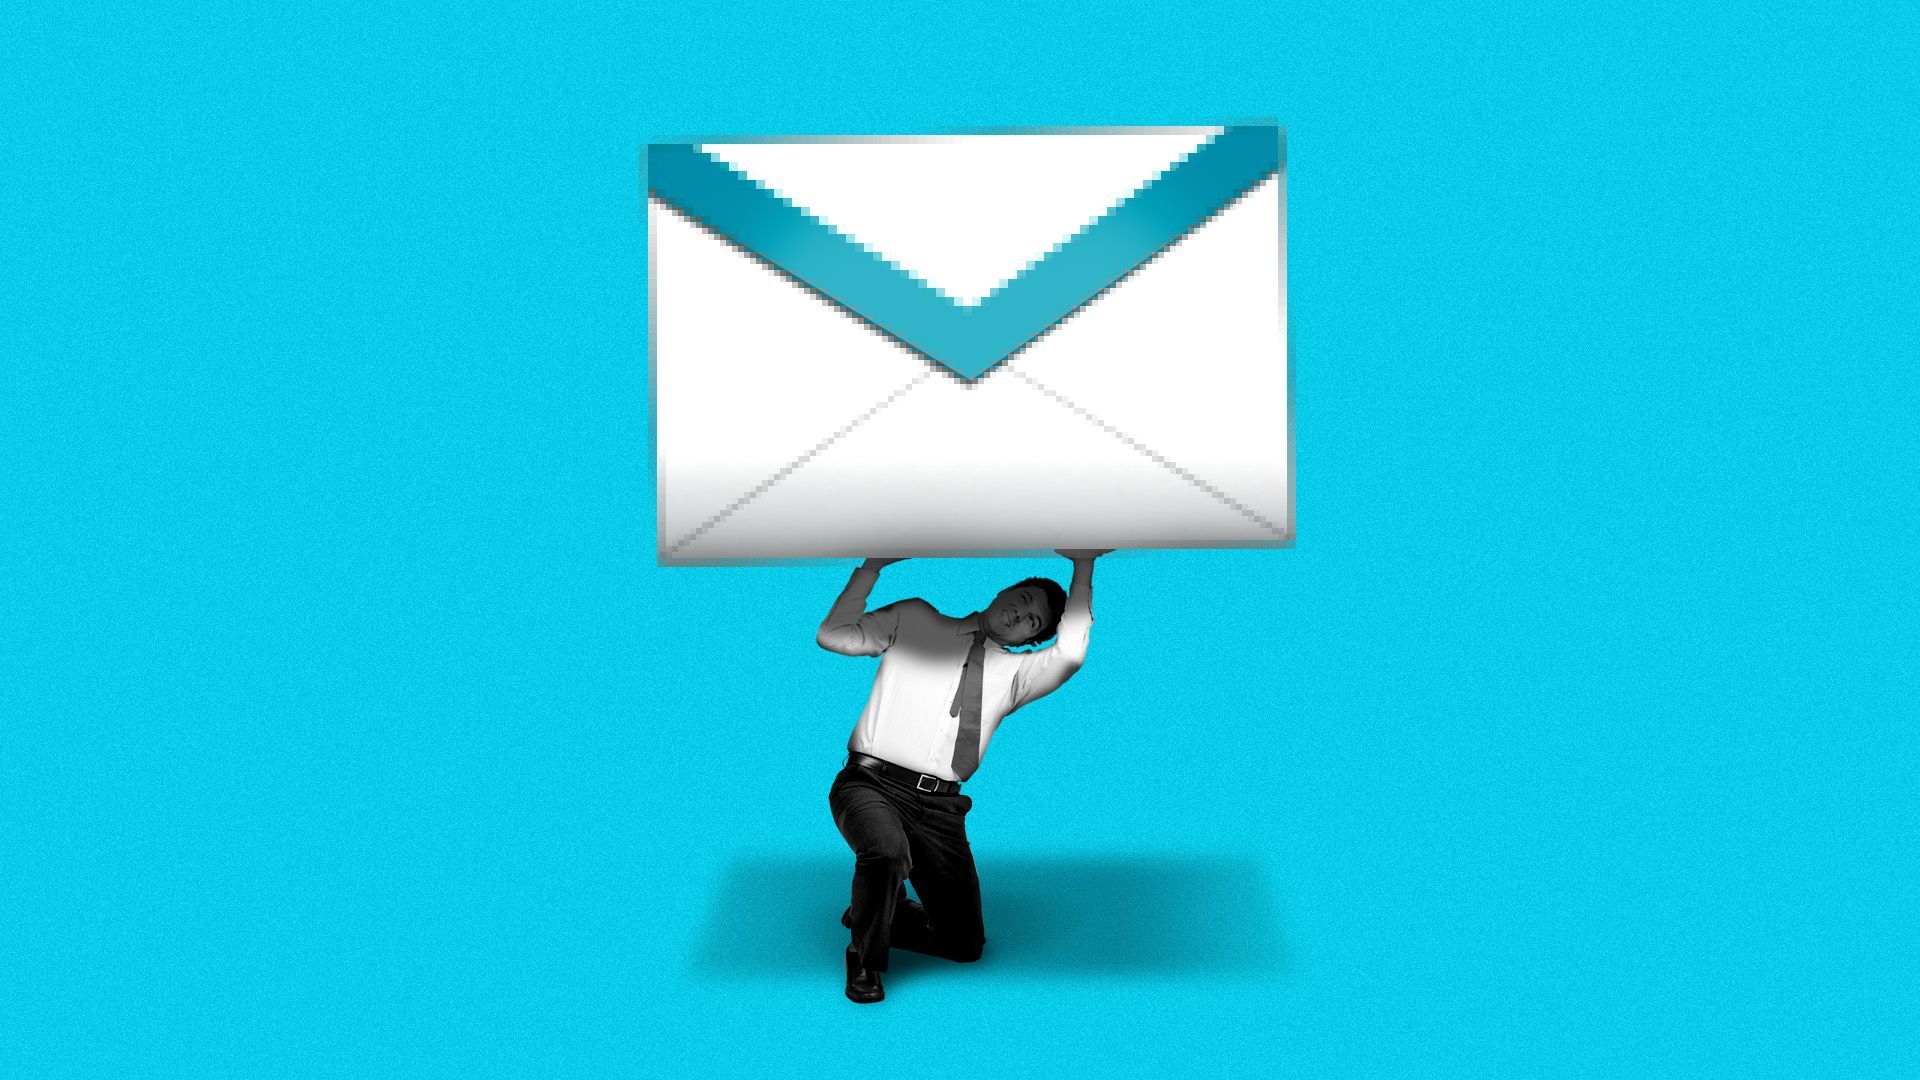 Illustration of a tiny man holding up a giant email icon